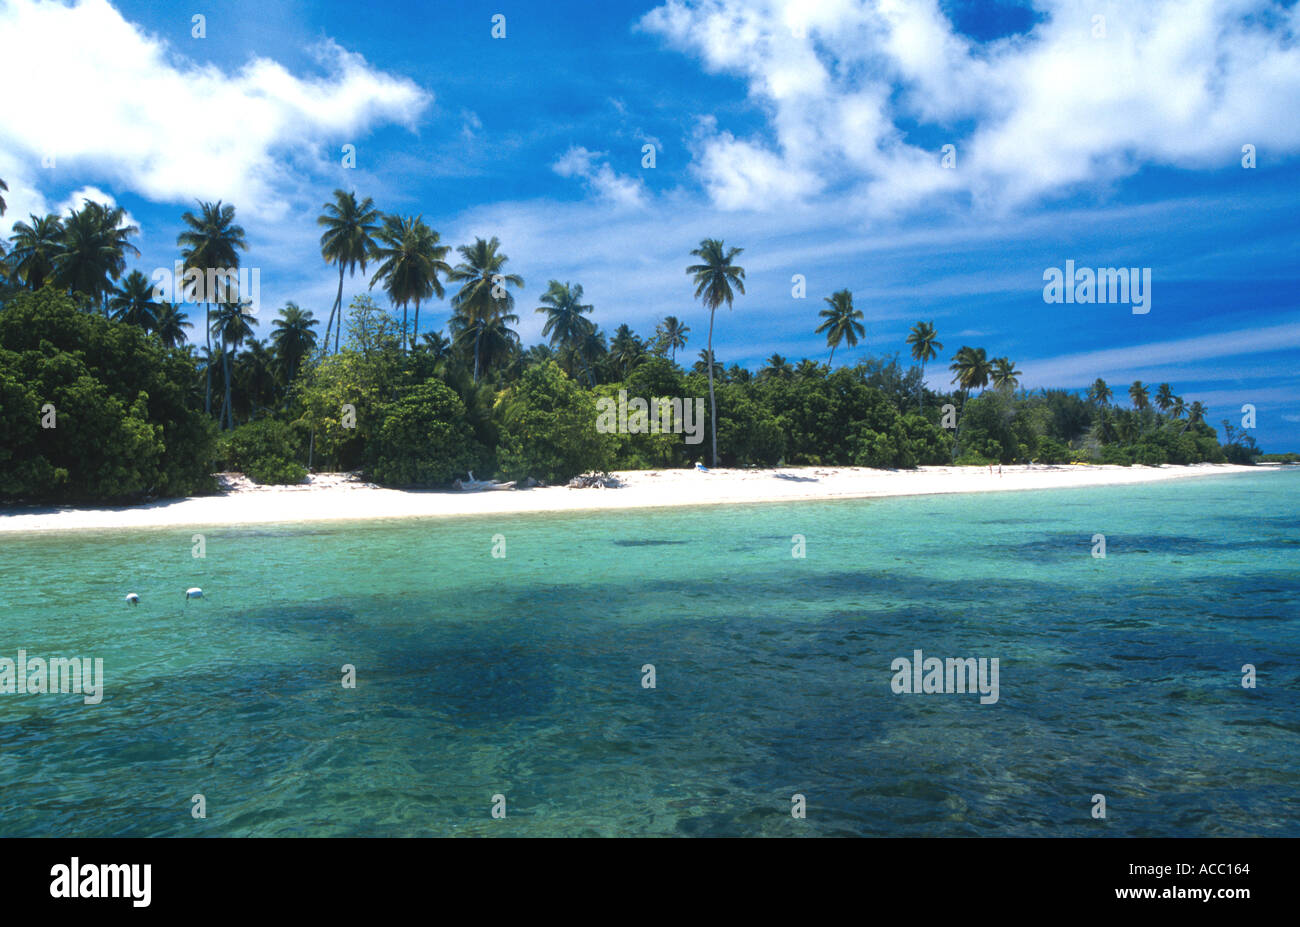 View of deserted beach from the sea Desroches Island Amirantes Seychelles Indian Ocean Stock Photo